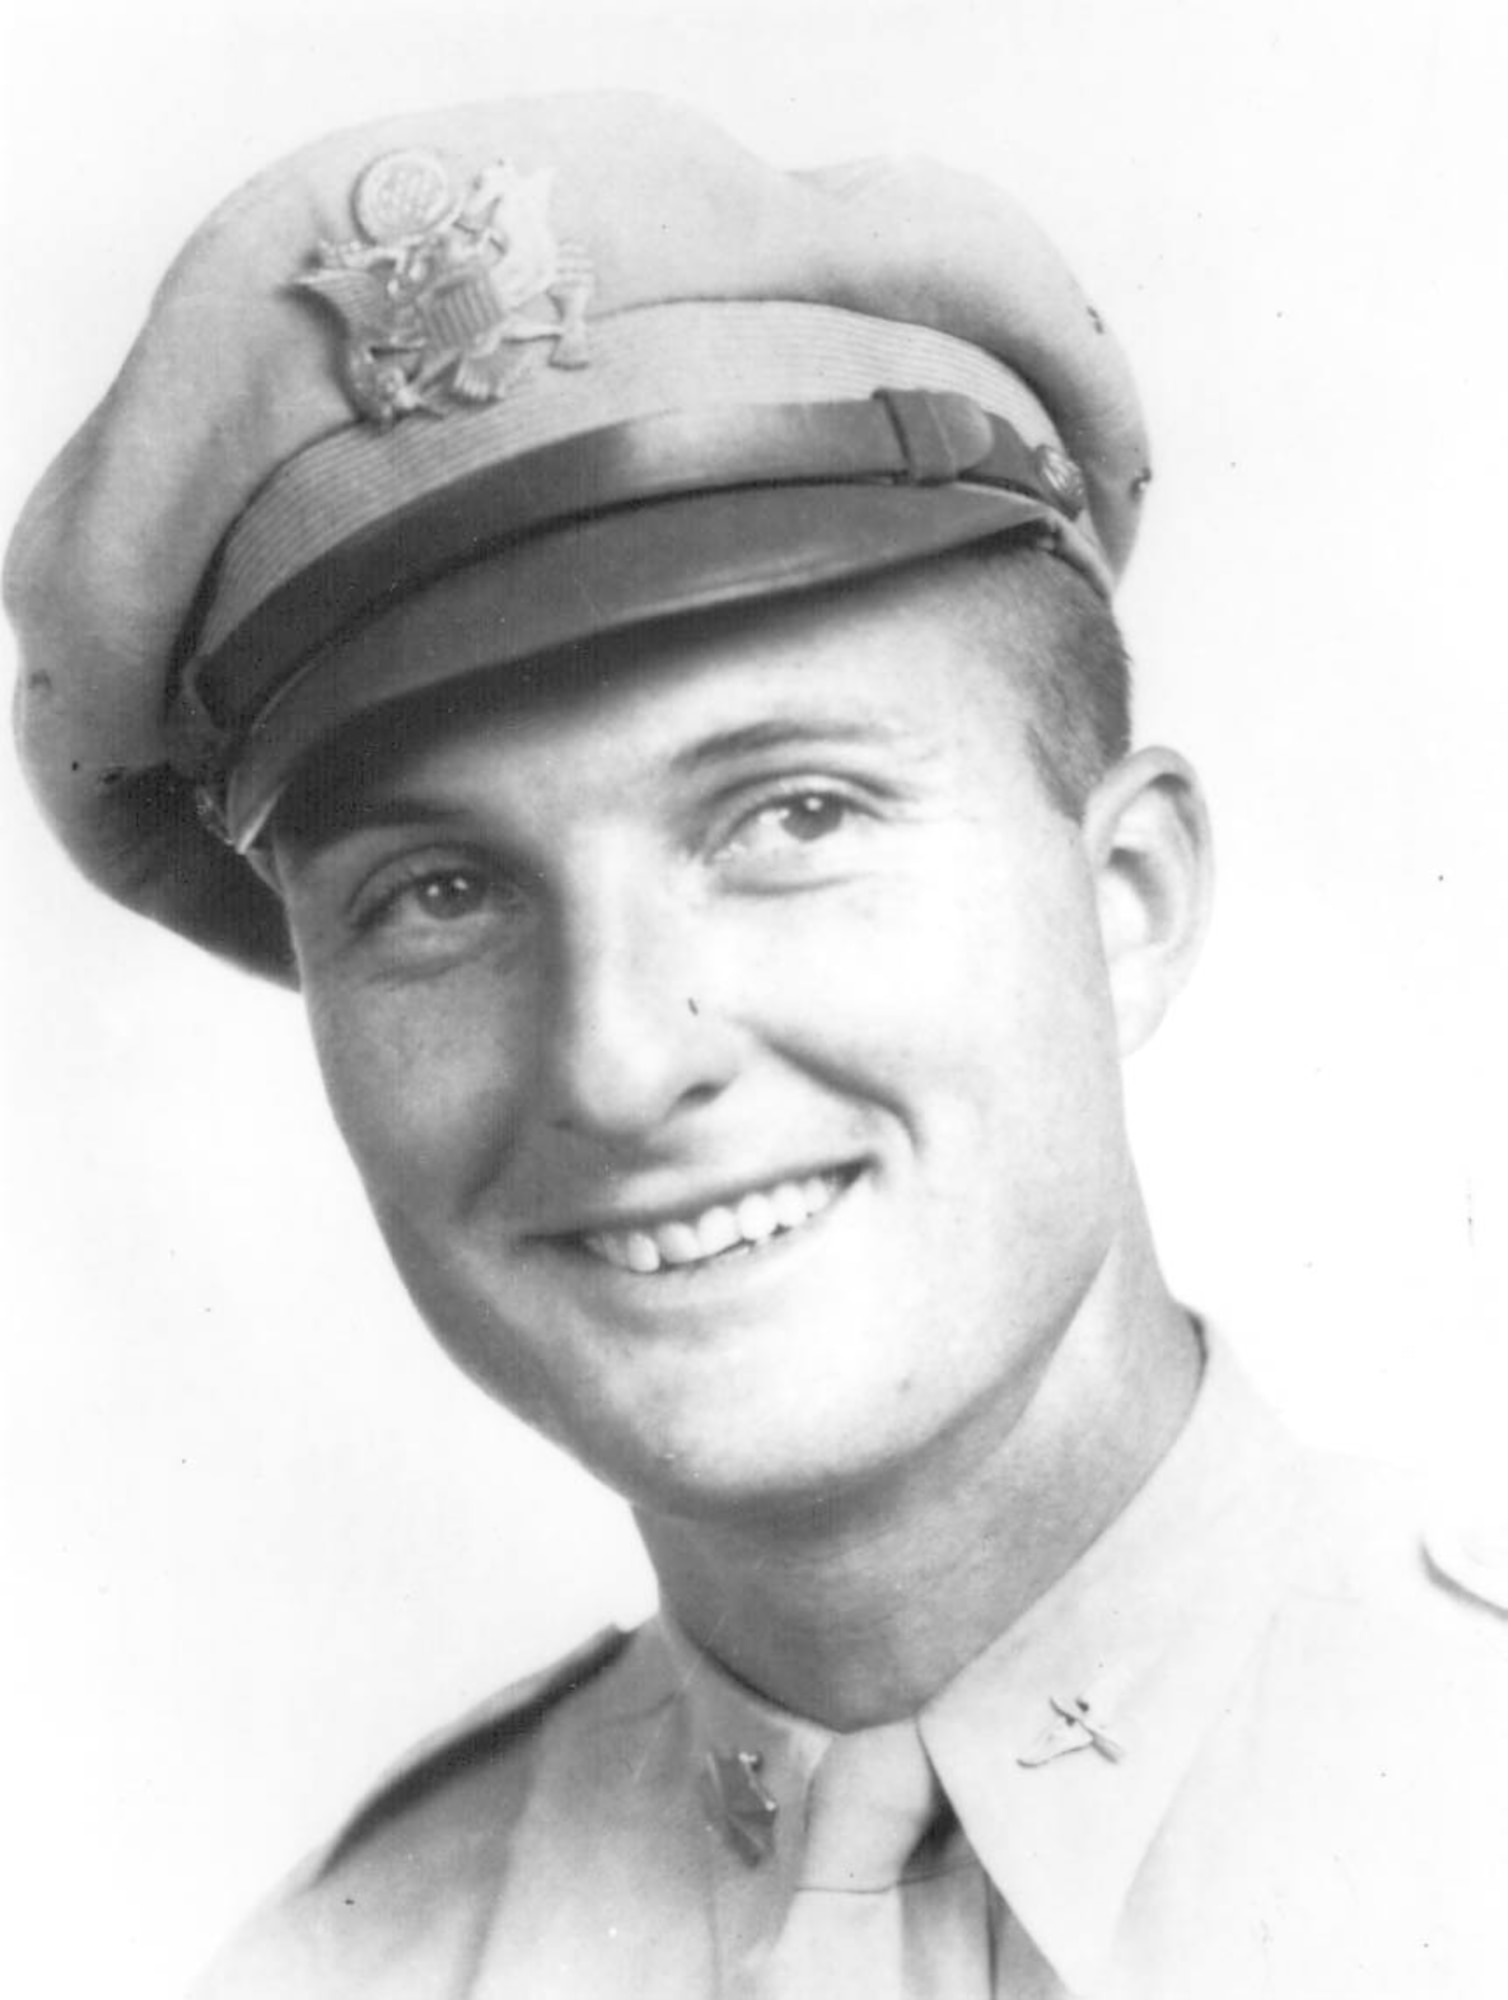 Medal of Honor recipient, WWII